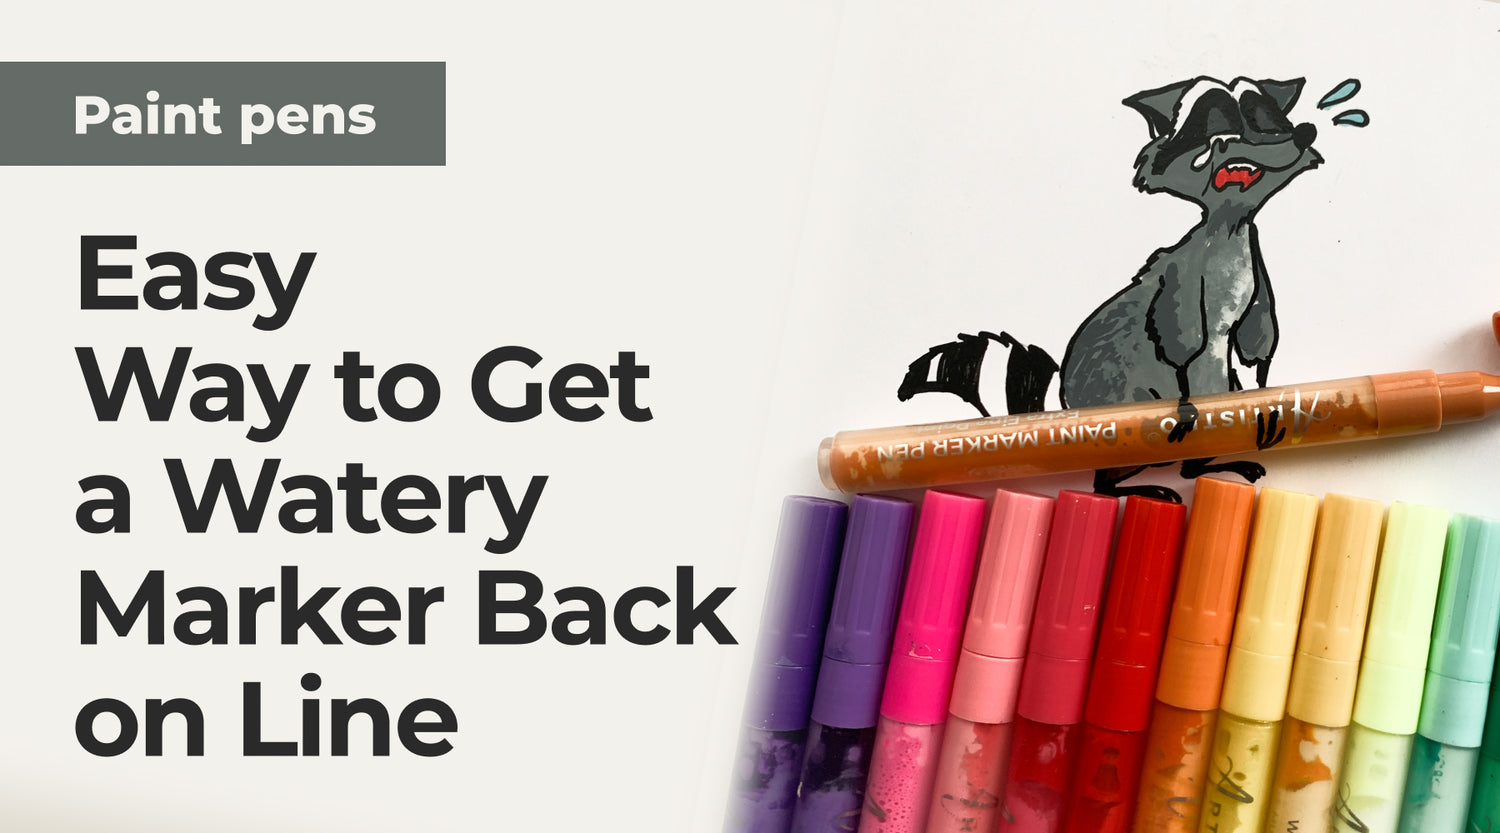 How to fix dried out paint markers: How to bring a marker back to life